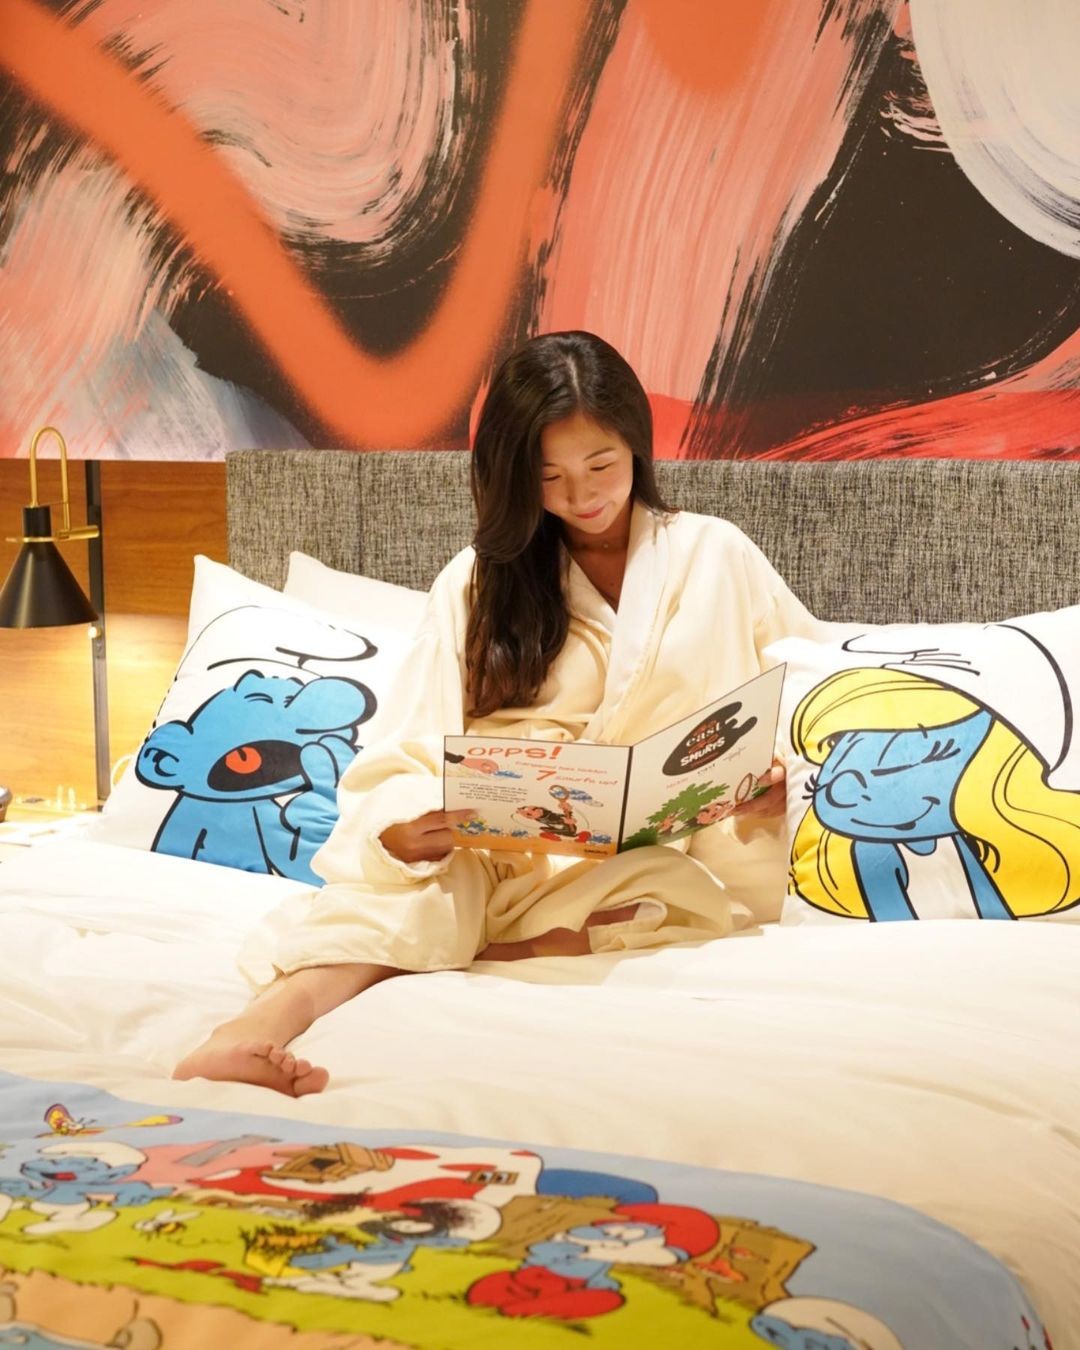 Let the Smurfs take you back to your childhood! Book your ‘mushroom house’ exclusively on Klook to spend an adventurous night in the Smurfs Village and receive a themed gift set. 

For details and reservations, please visit link in bio.

📷: @leilawxxg 

#StayatEAST #atEAST #EatatEAST #EASTHongKong